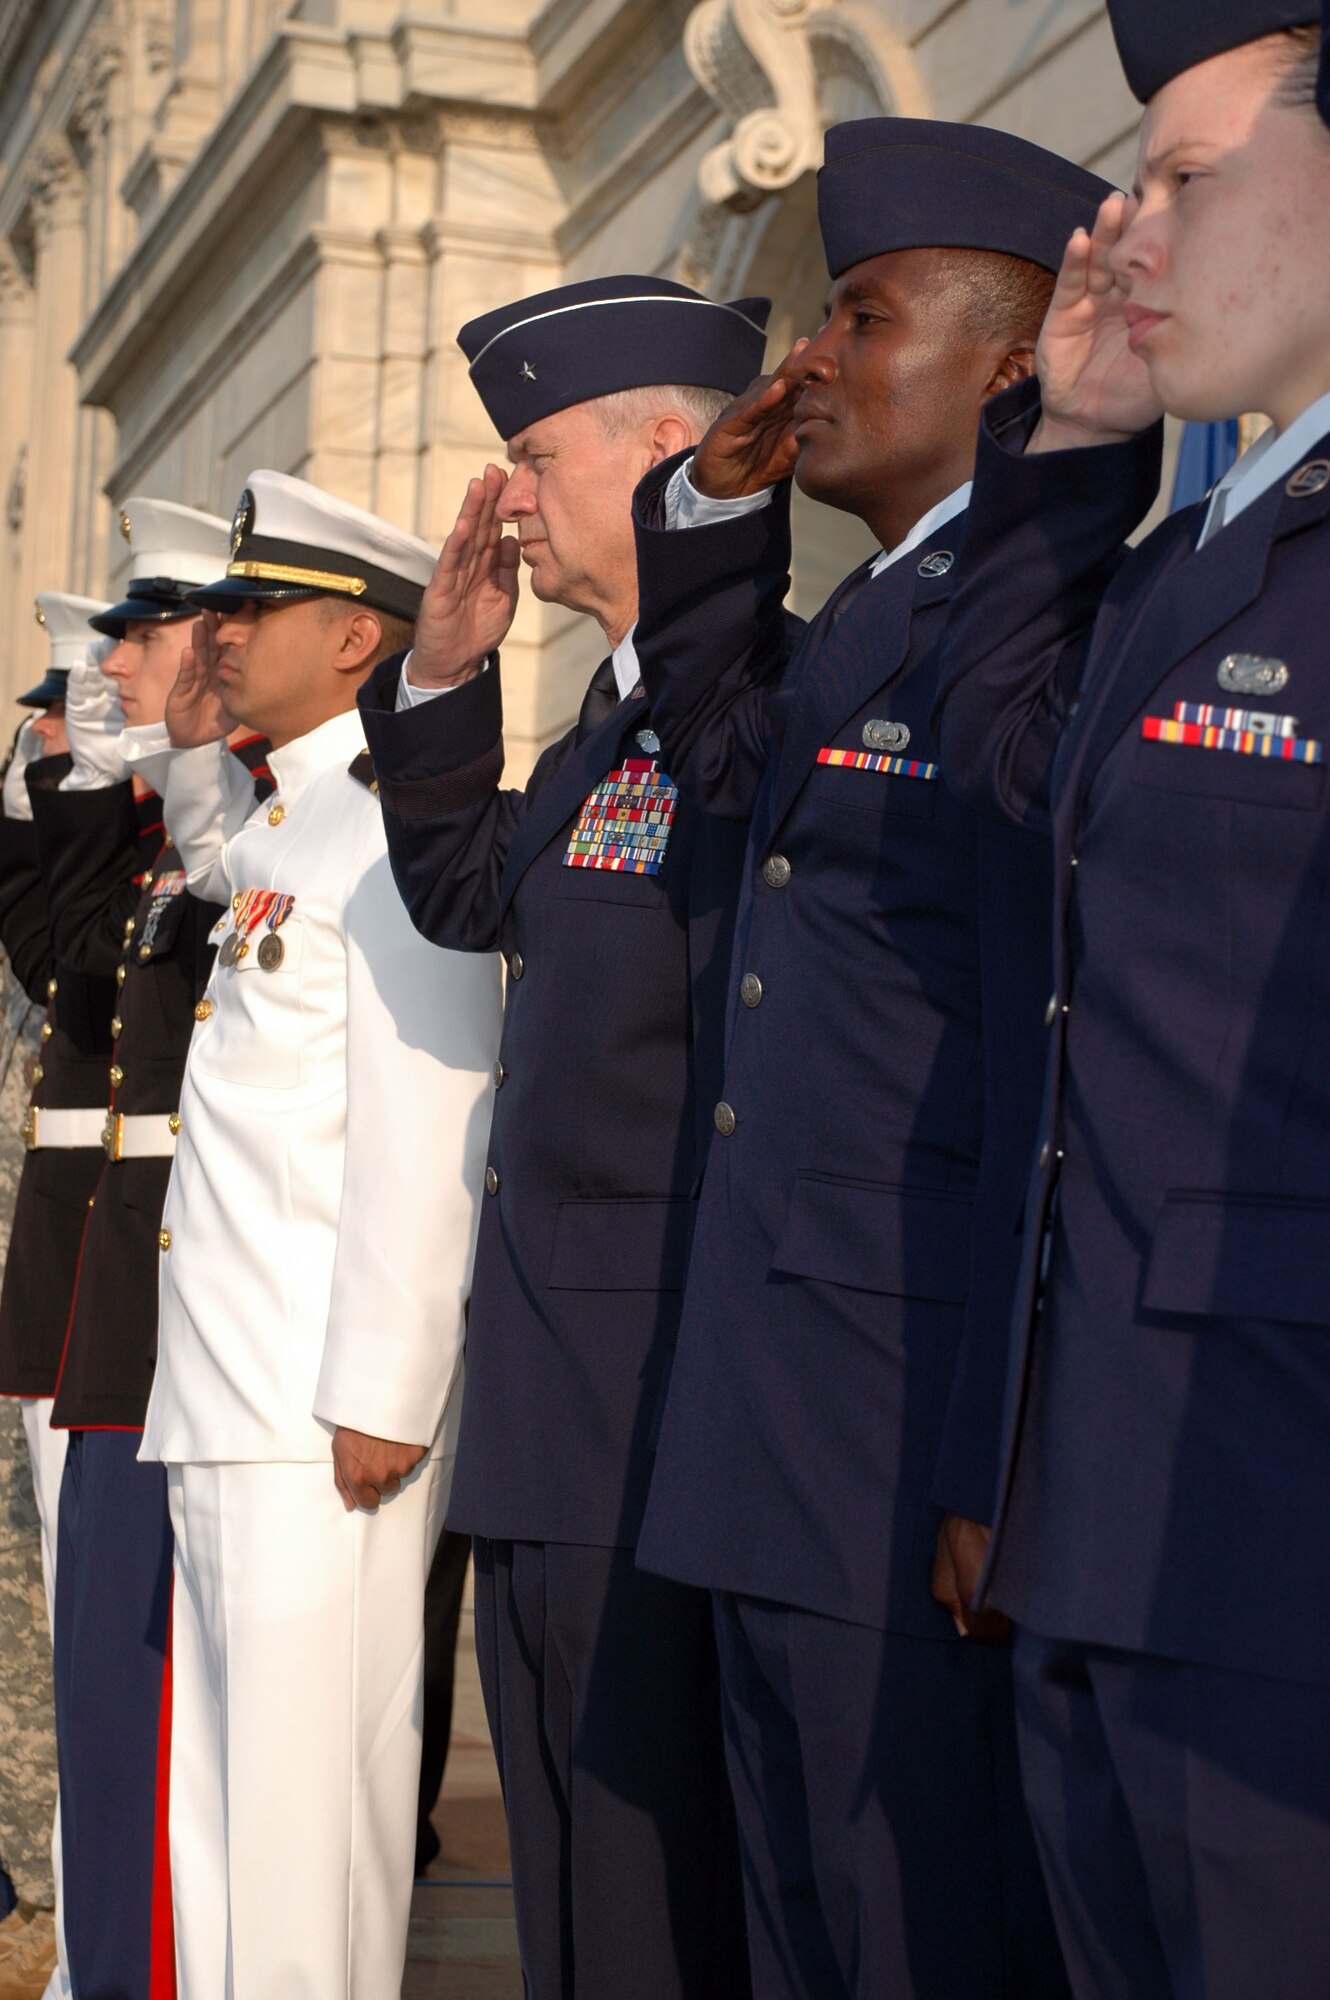 From Left to Right, Brig. Gen. Mark Johnson, Chief of Staff Air, Minn. Air National Guard, Senior Airman Sammy Muriuki, 934th Airlift Wing Communications Flight, and Senior Airman Amaris Carter, 934th CF salute at the Patriot Day 0-11 ceremony at the Minnesota state capitol. (Air Force Photo/Staff Sgt. Josh Moshier) 